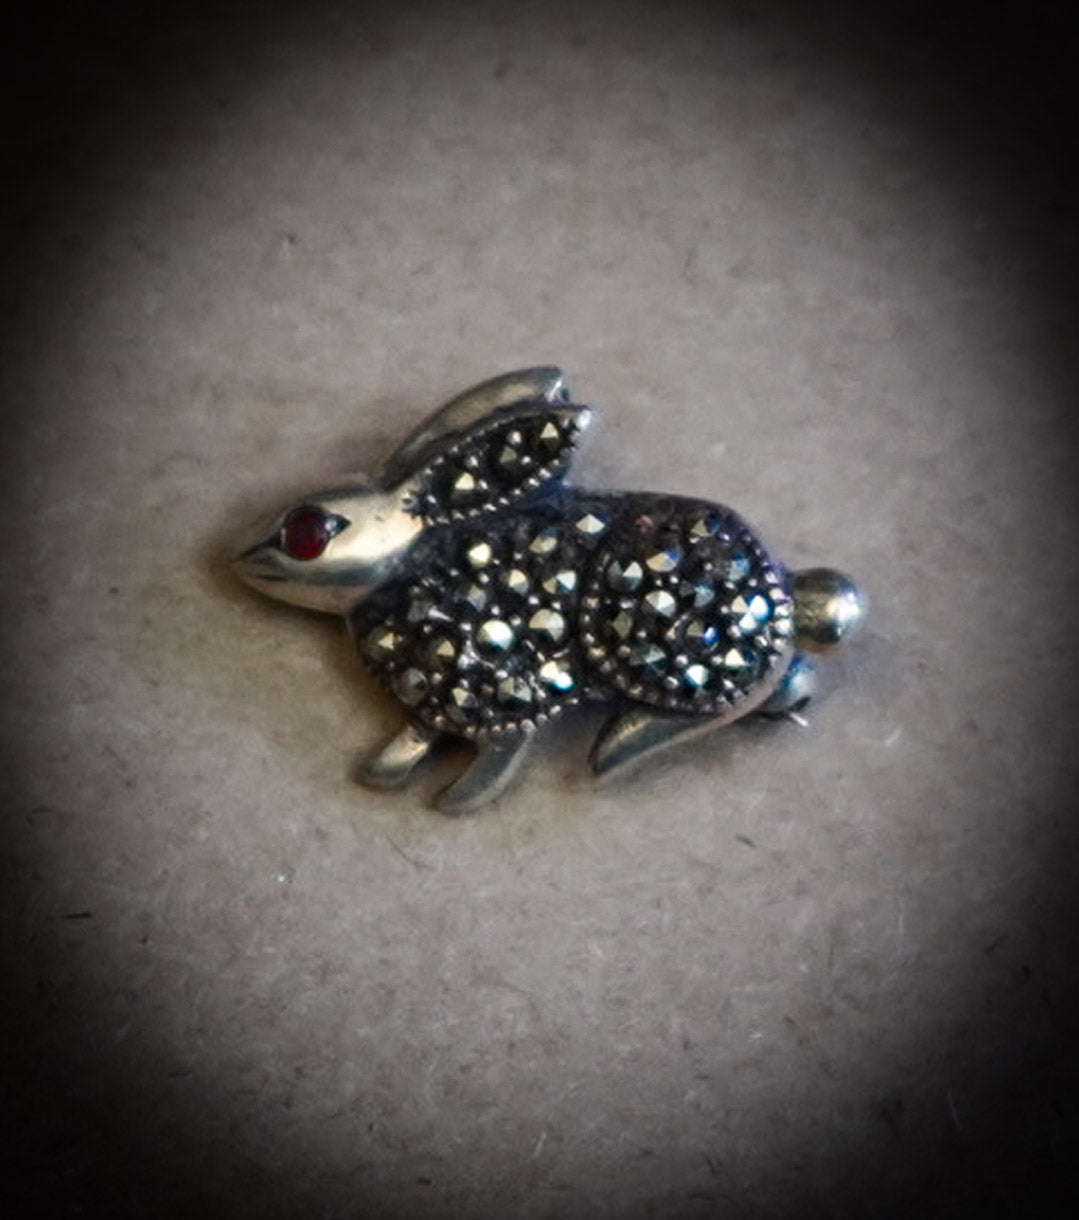 "White Rabbit" 925 Silver and Marcasite Lapel Pin/ Pendant Necklace